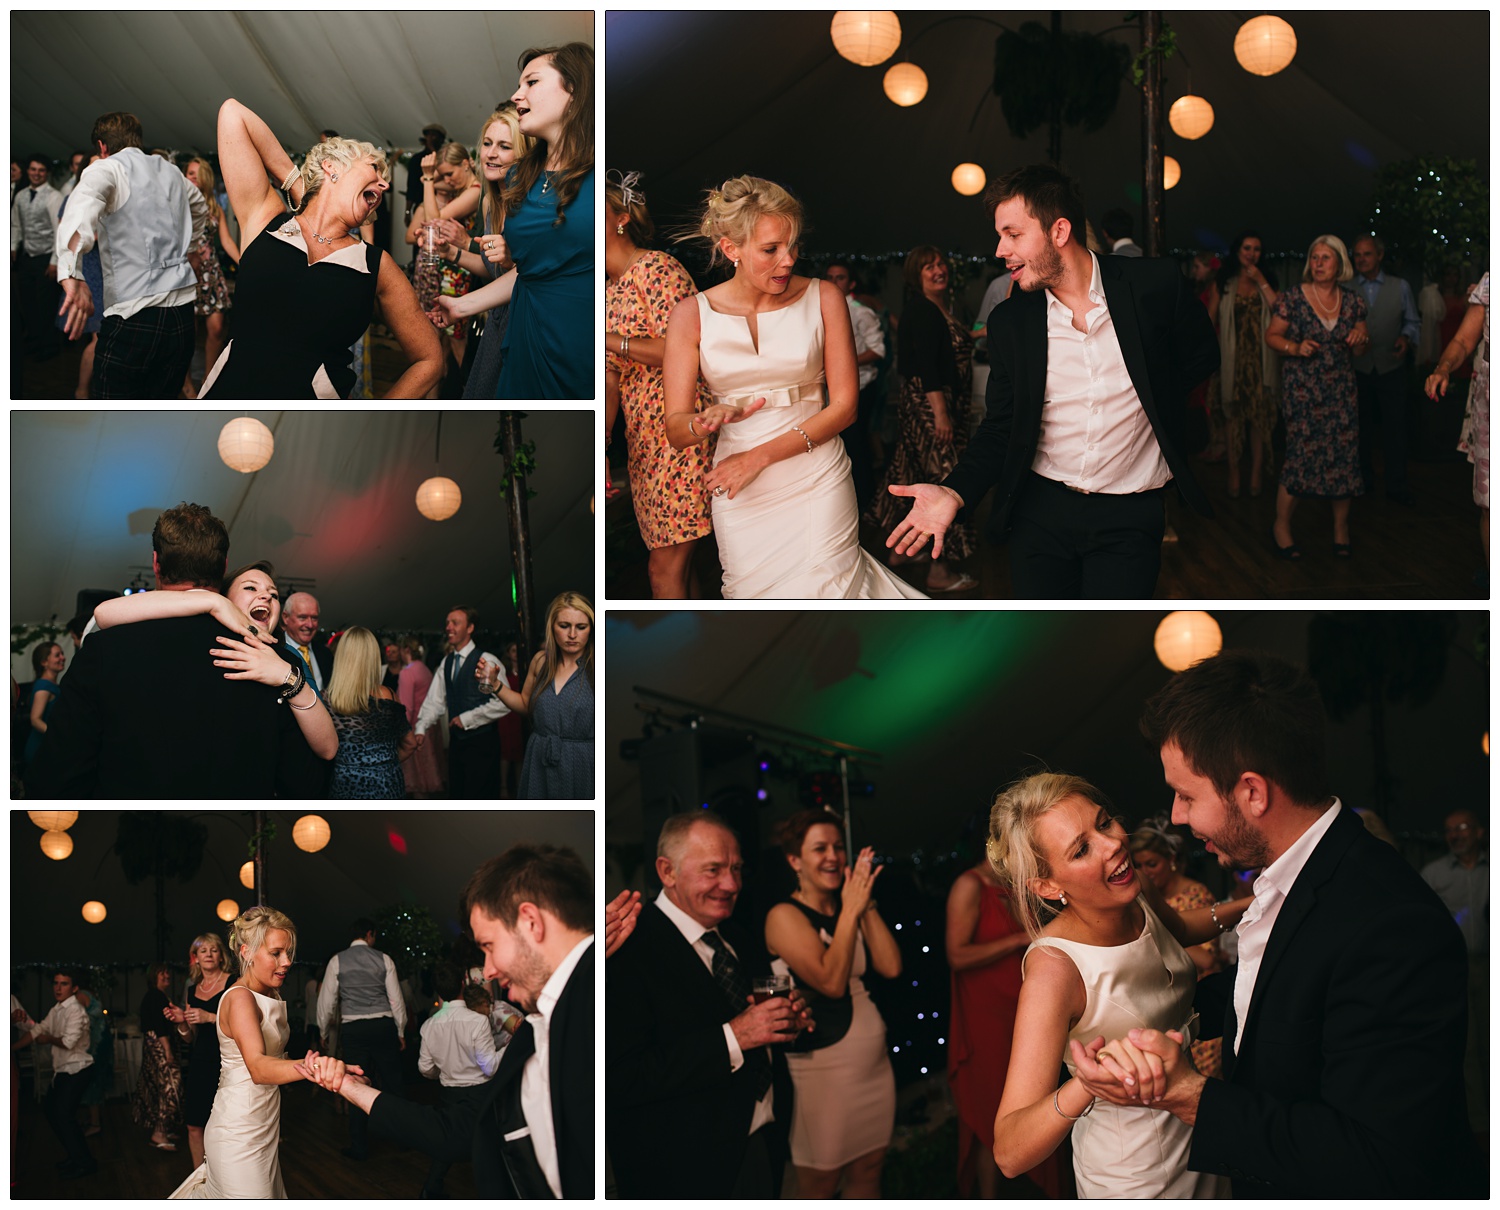 Bride is dancing with a friend in her reception marquee. There are round paper lanterns on the ceiling.